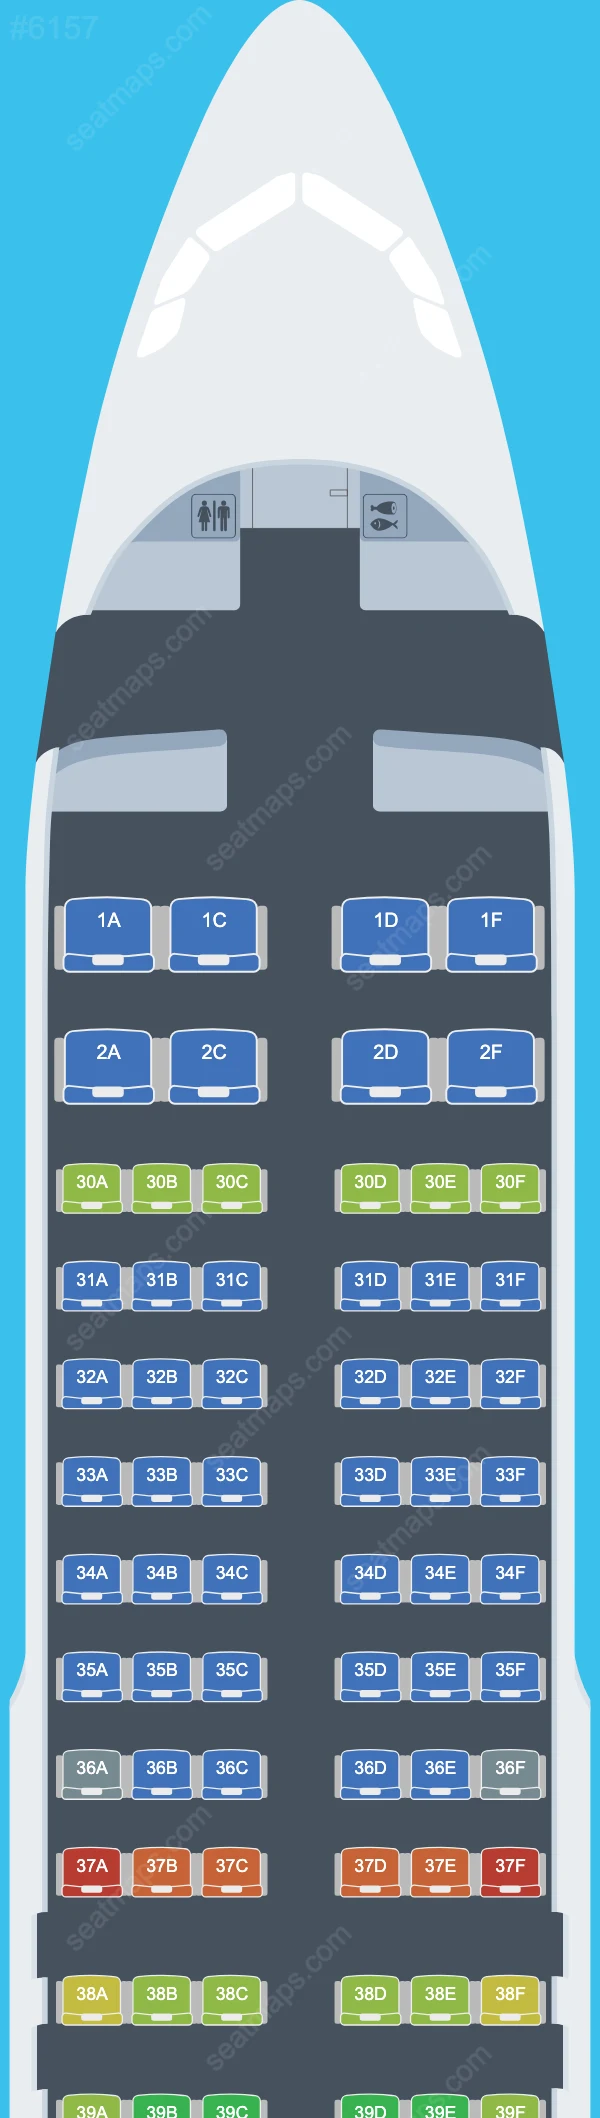 Sichuan Airlines Airbus A320 Seat Maps A320-200 V.1